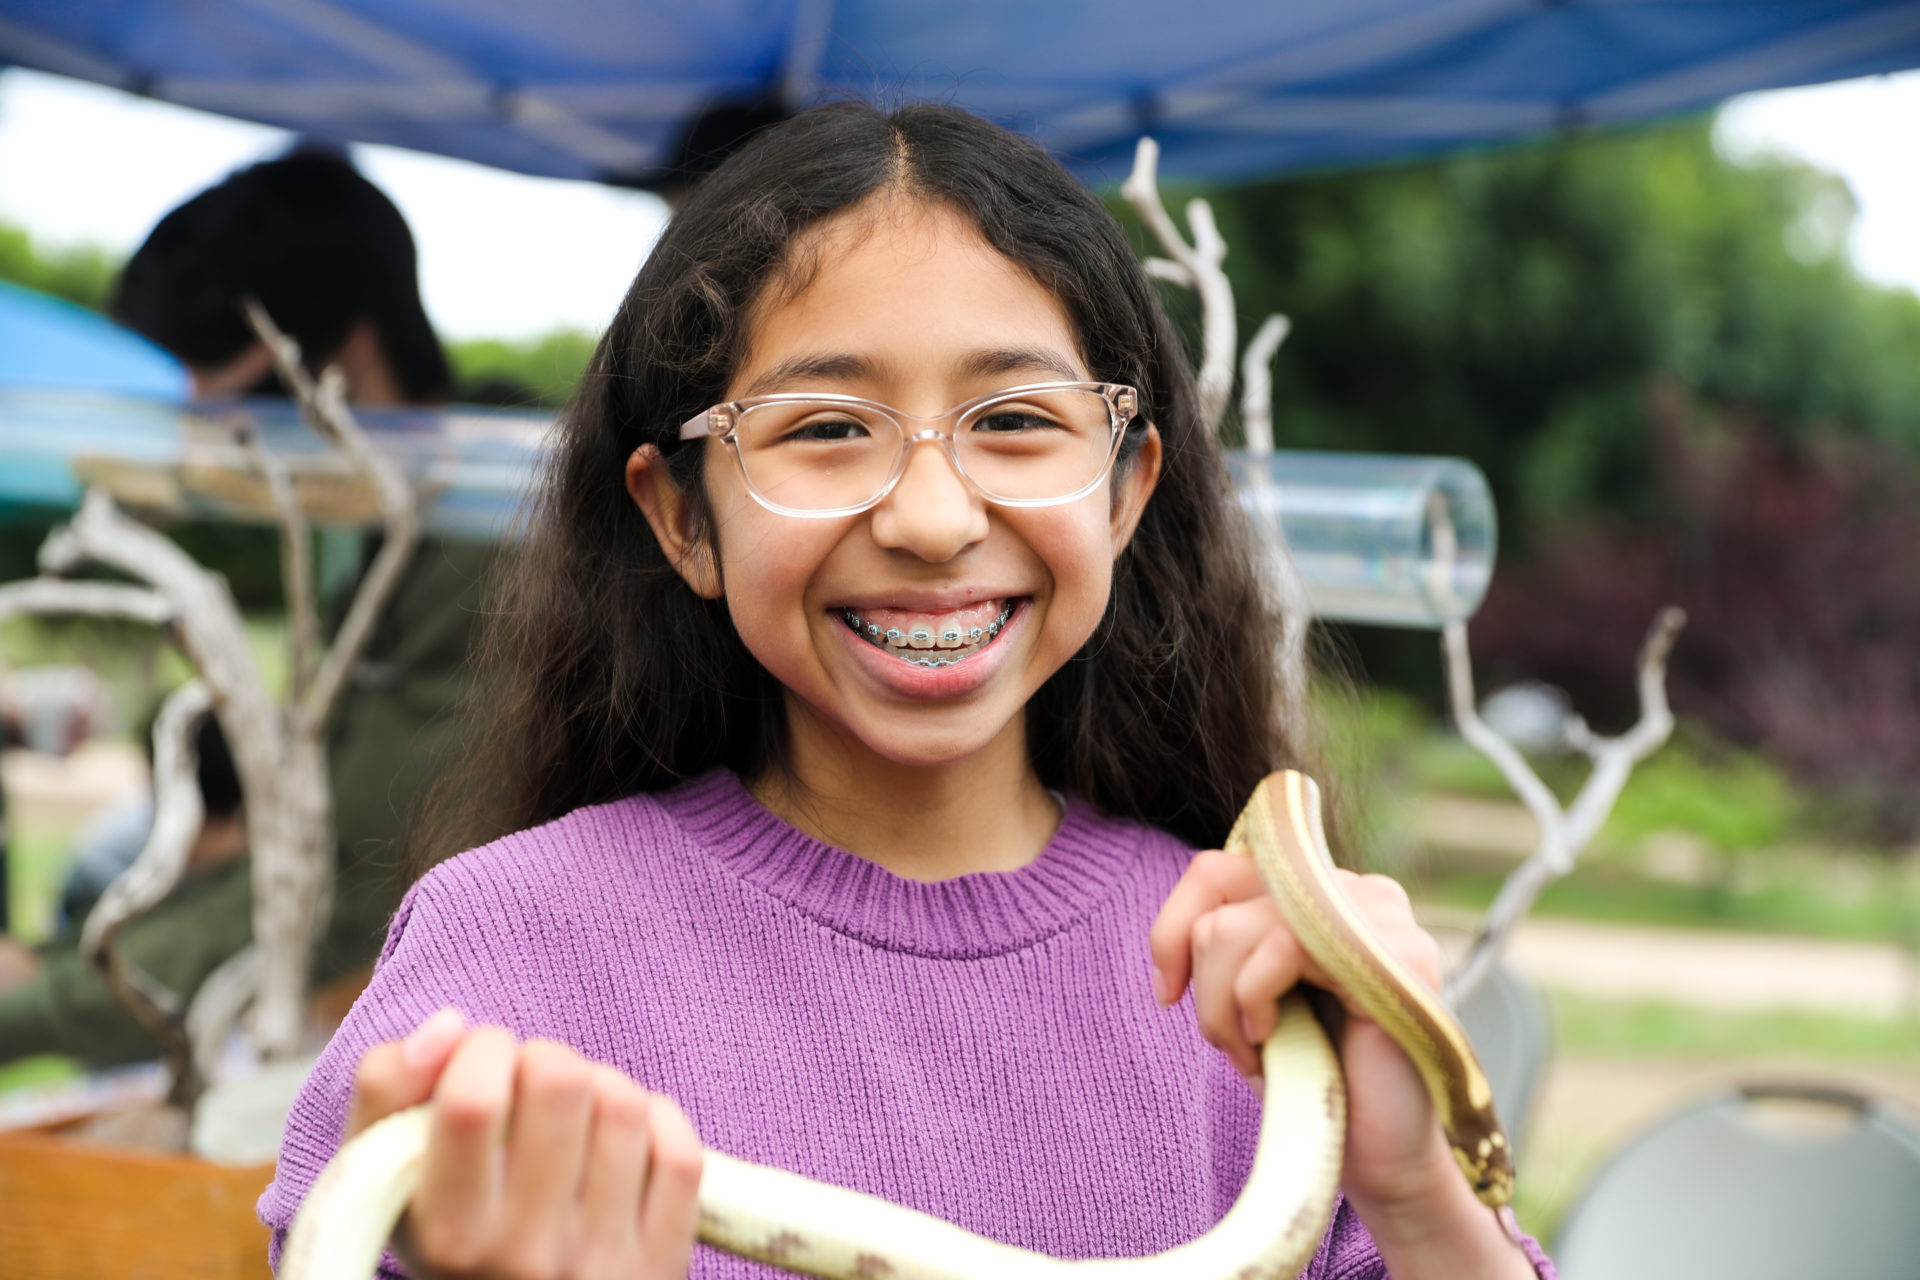 5th Grade Student Holding a Snake and Smiling